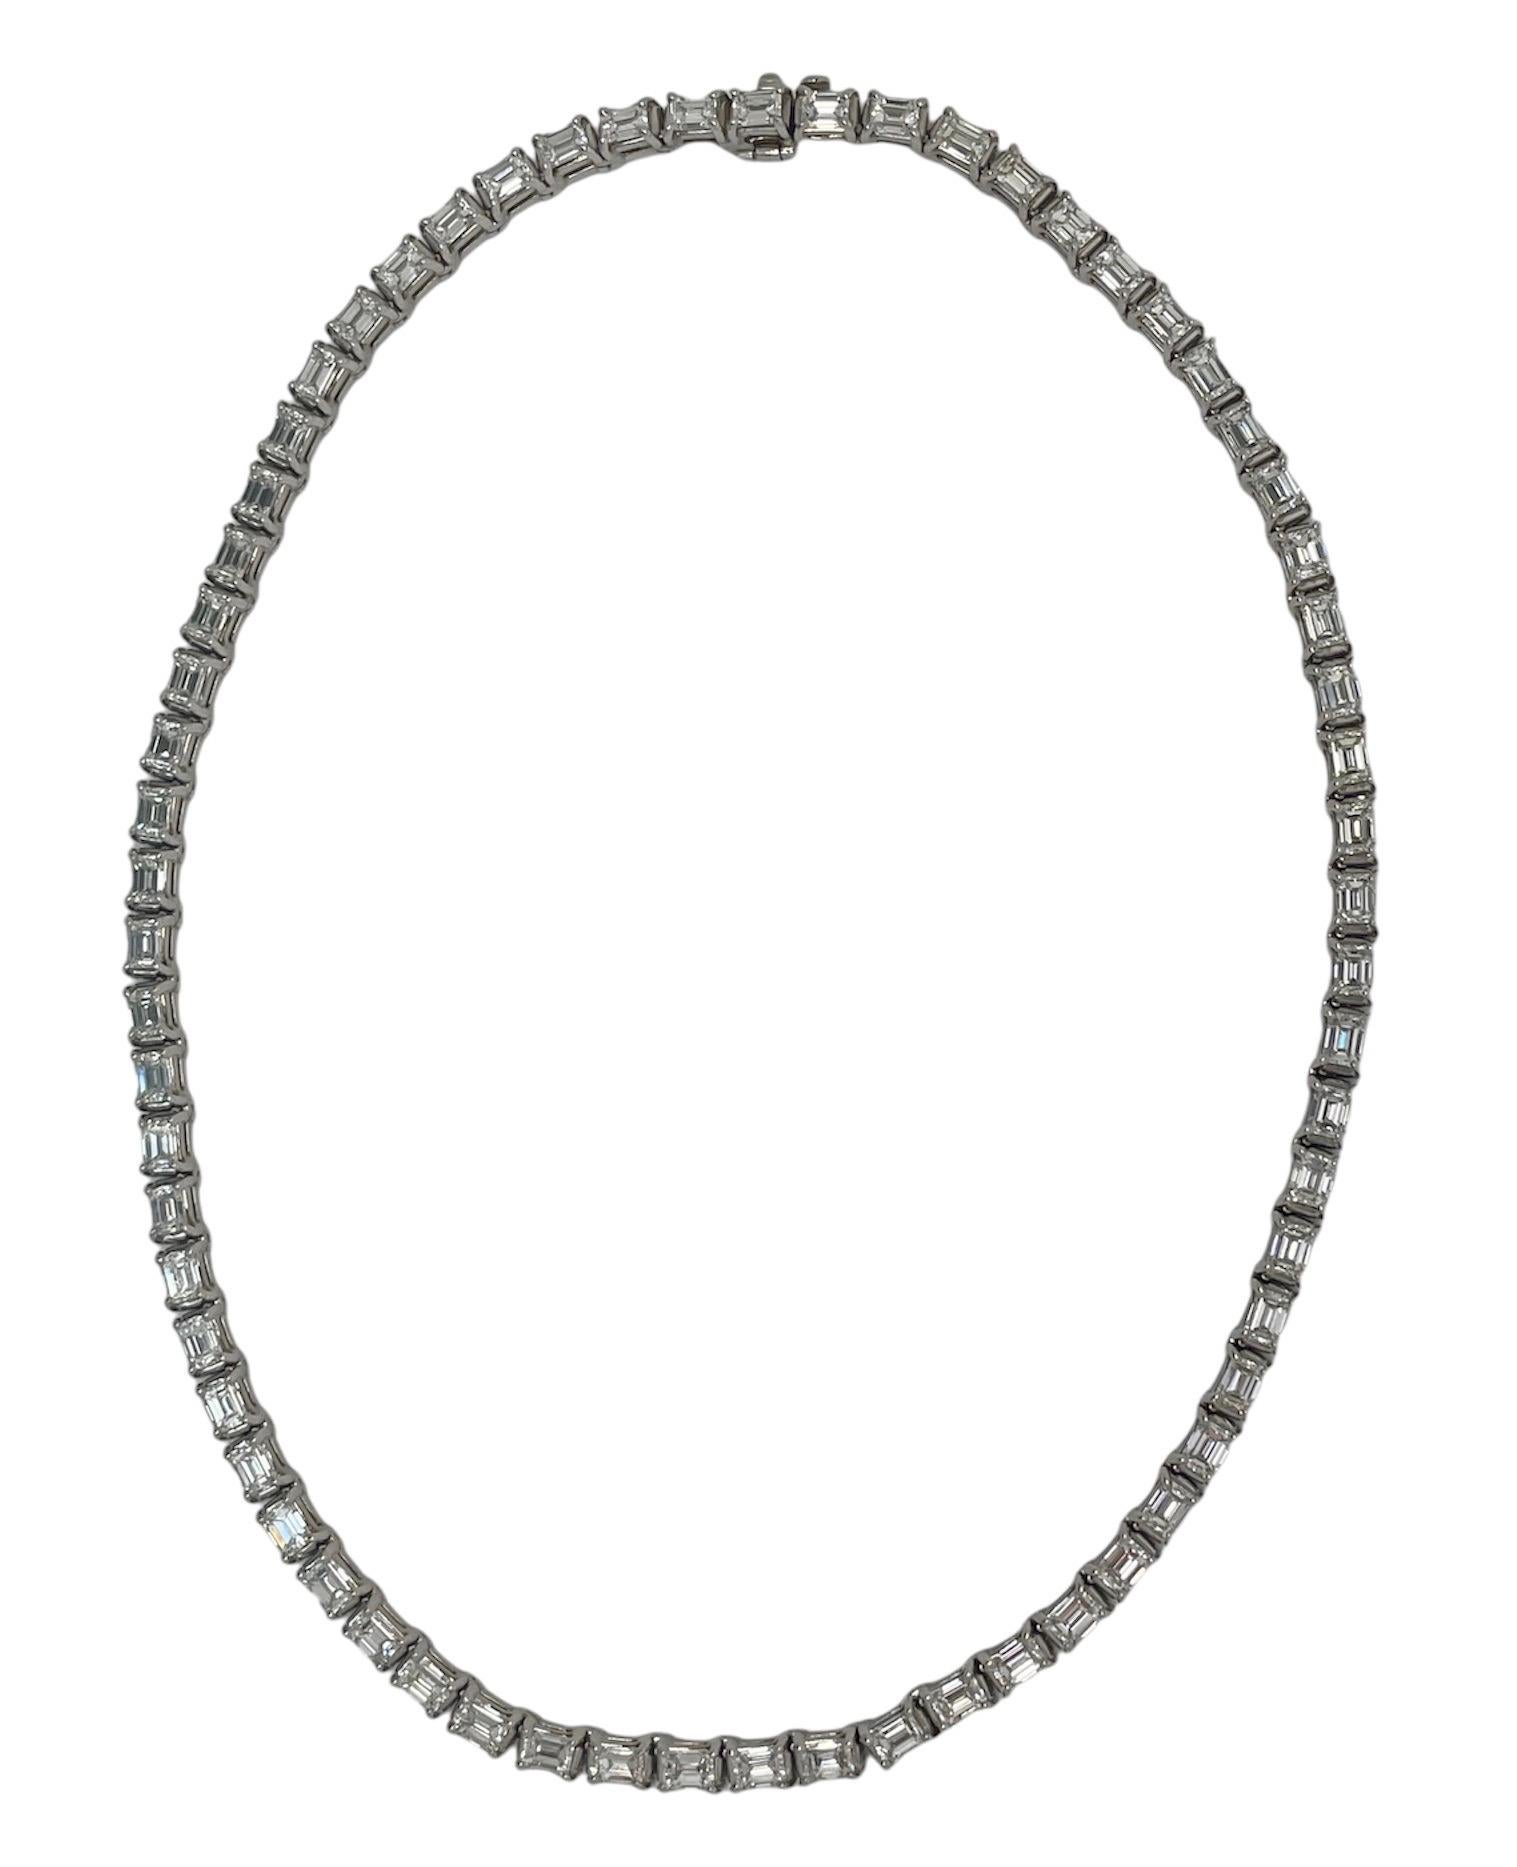 20.64 Carats Emerald Cut Diamond and Platinum Necklace In Excellent Condition For Sale In Chicago, IL